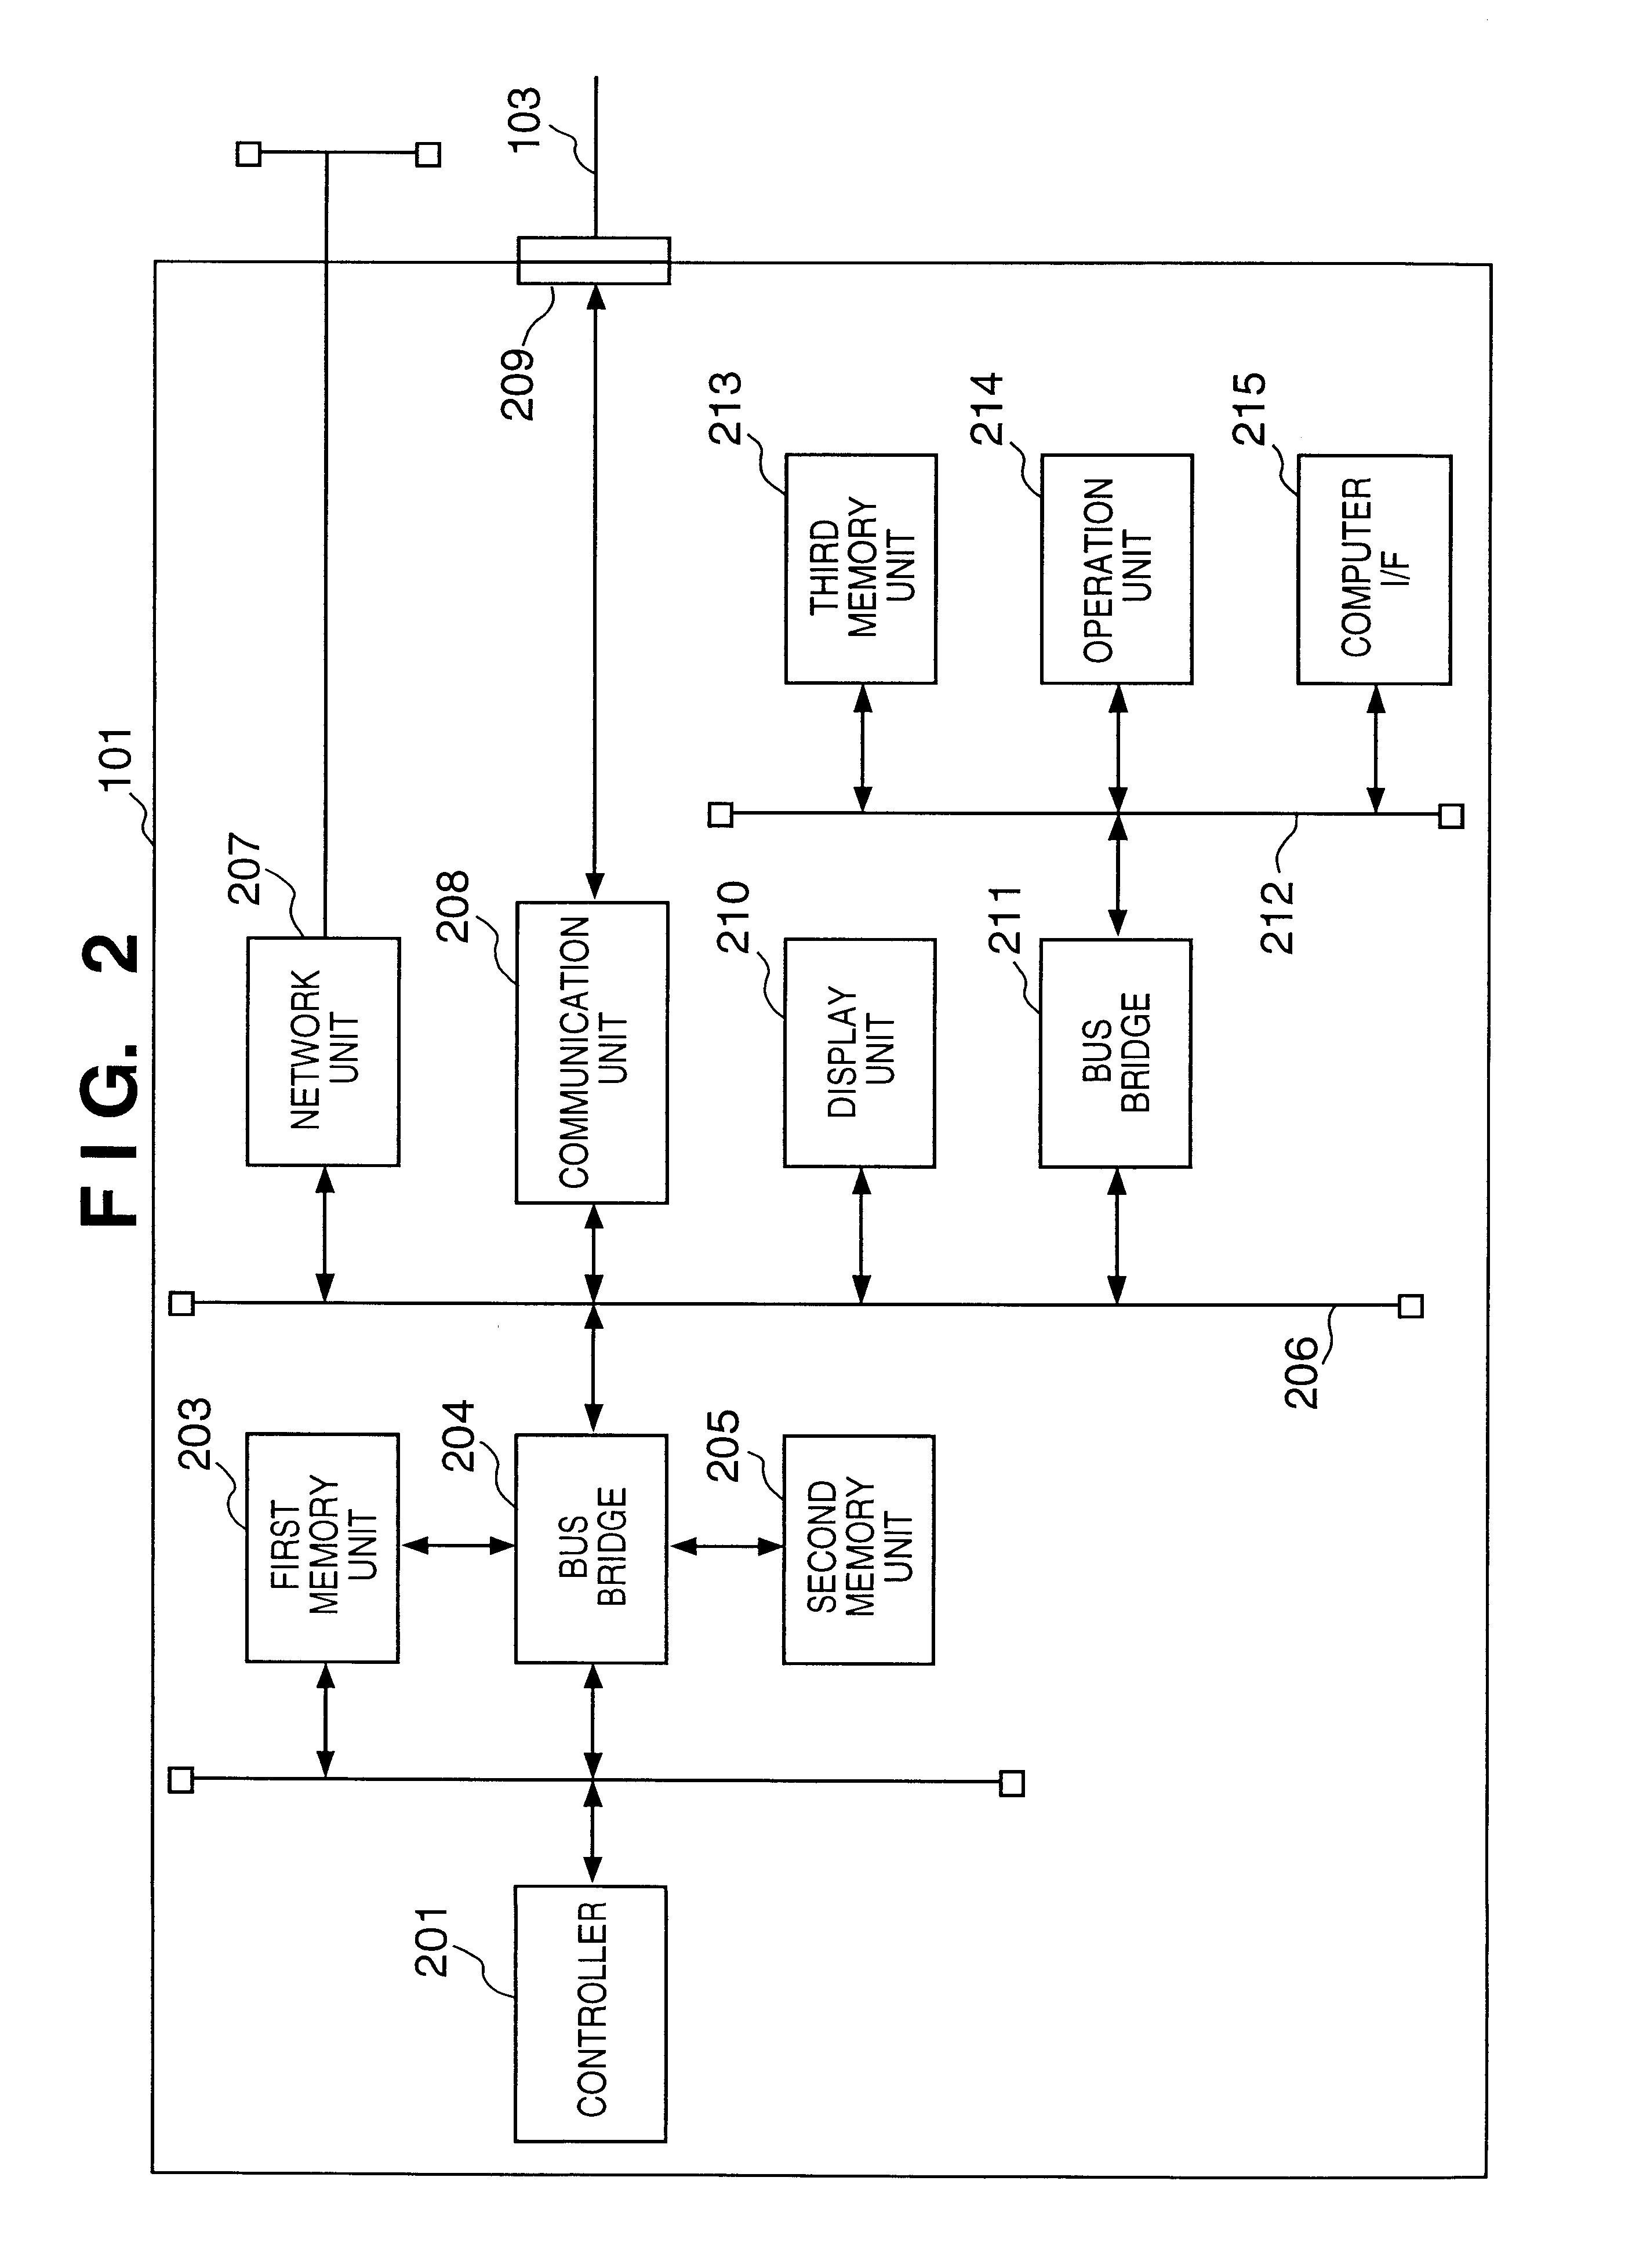 Image processing system, apparatus, method, and software